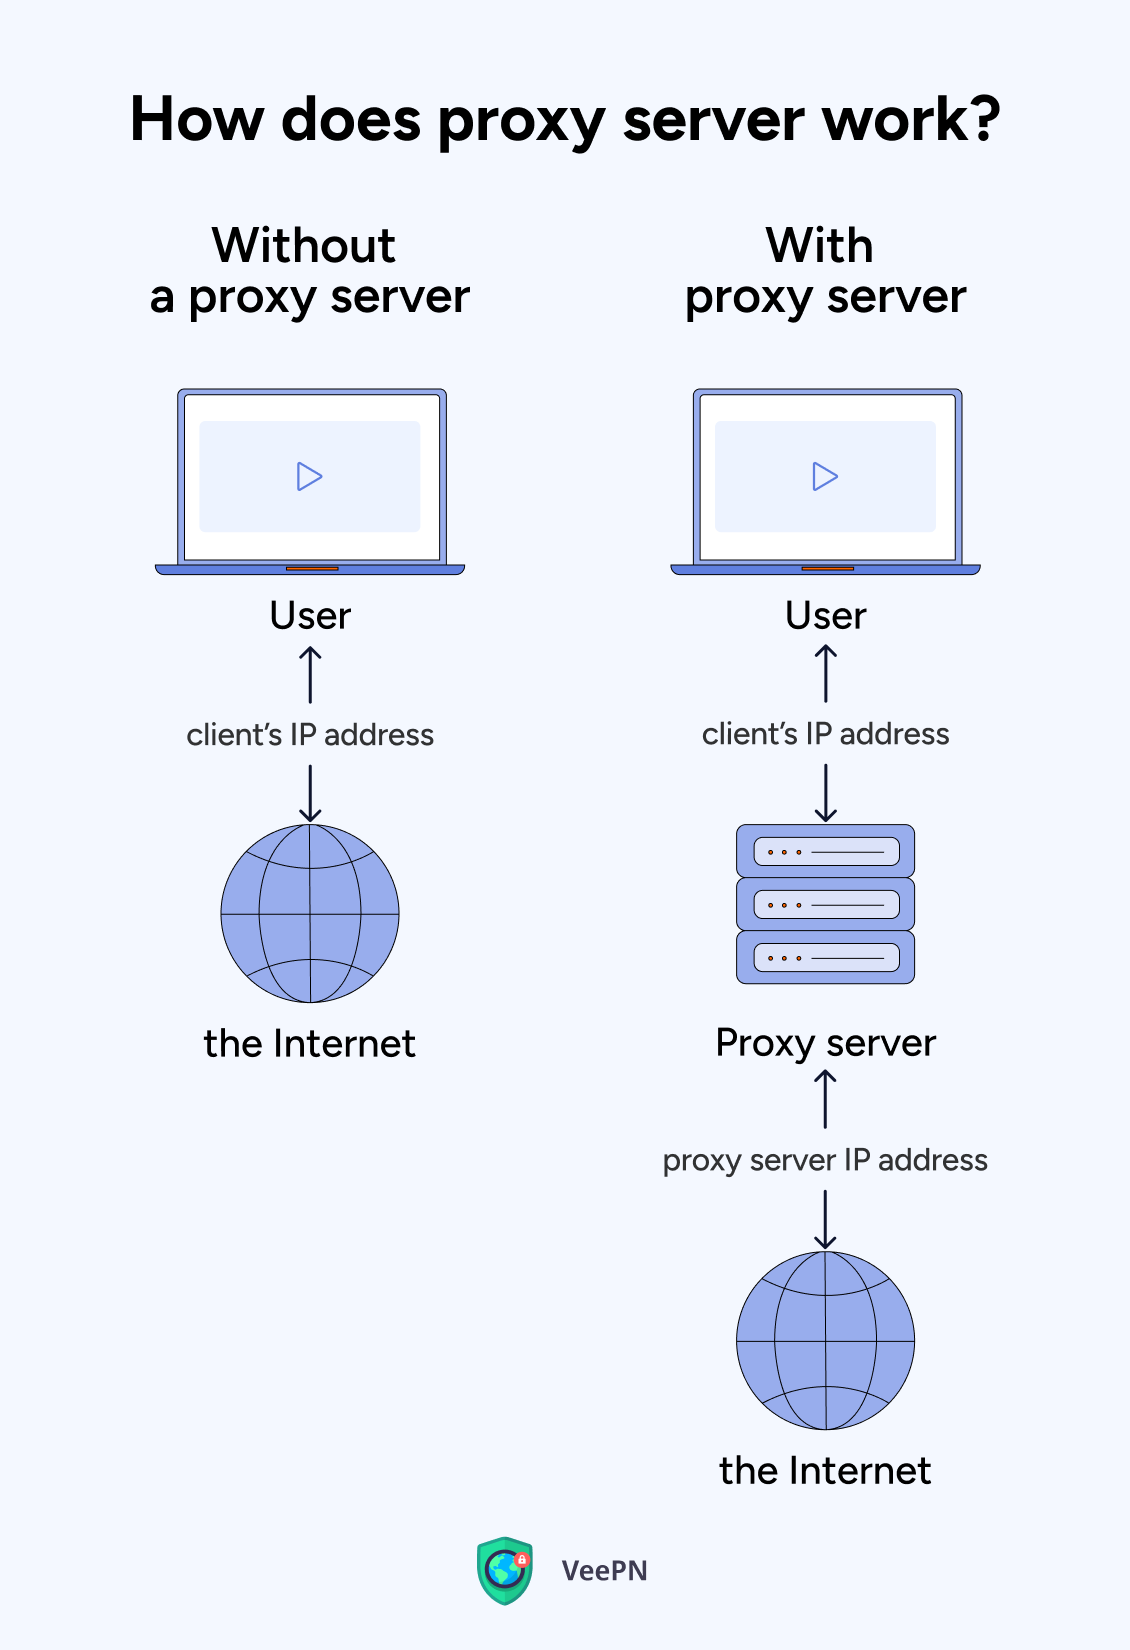 How does a proxy server work?